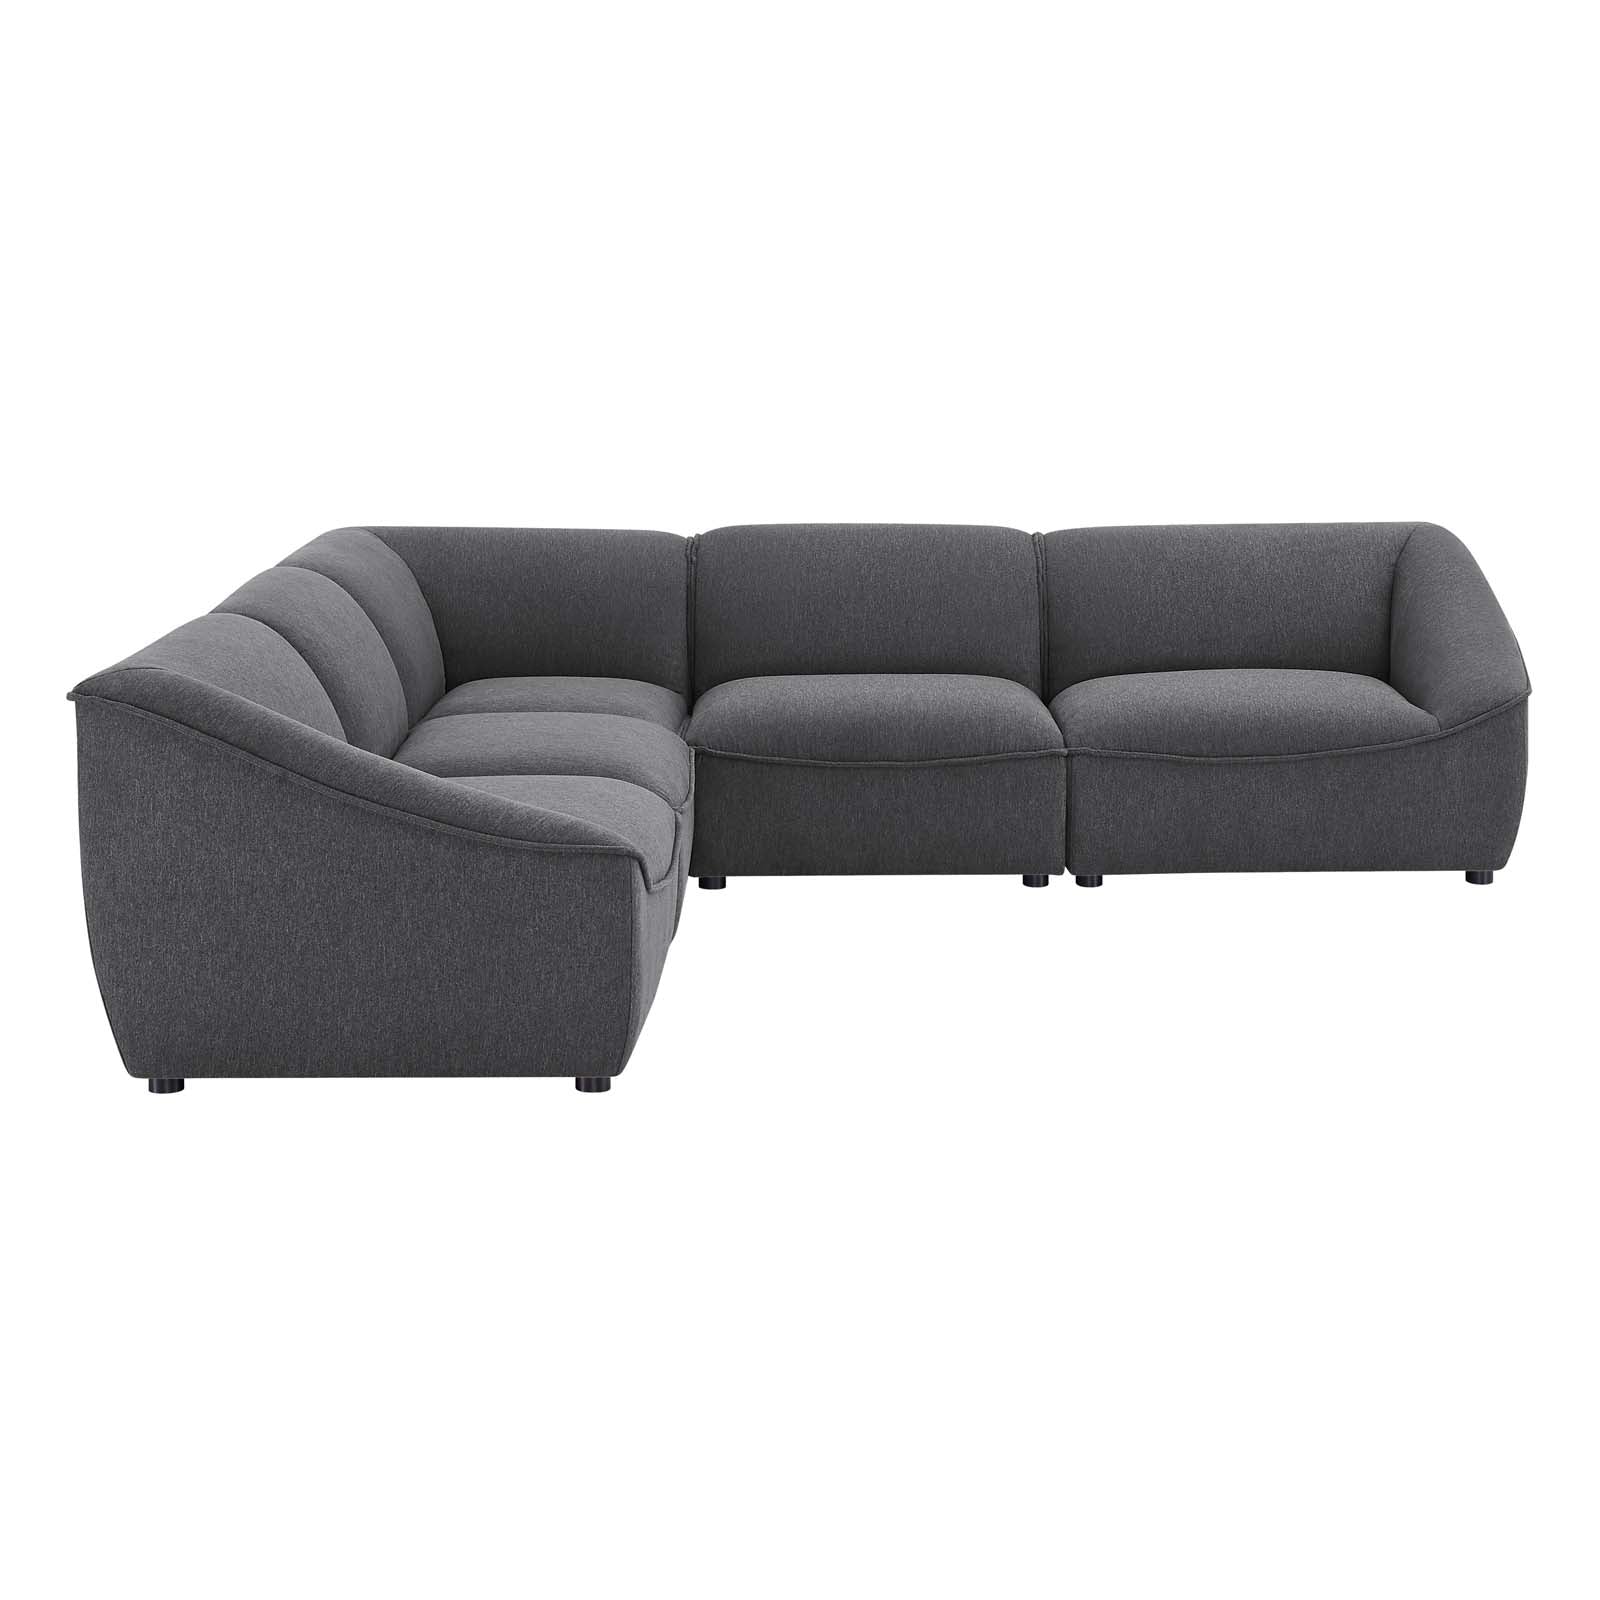 Comprise 5-Piece Sectional Sofa-Sectional-Modway-Wall2Wall Furnishings